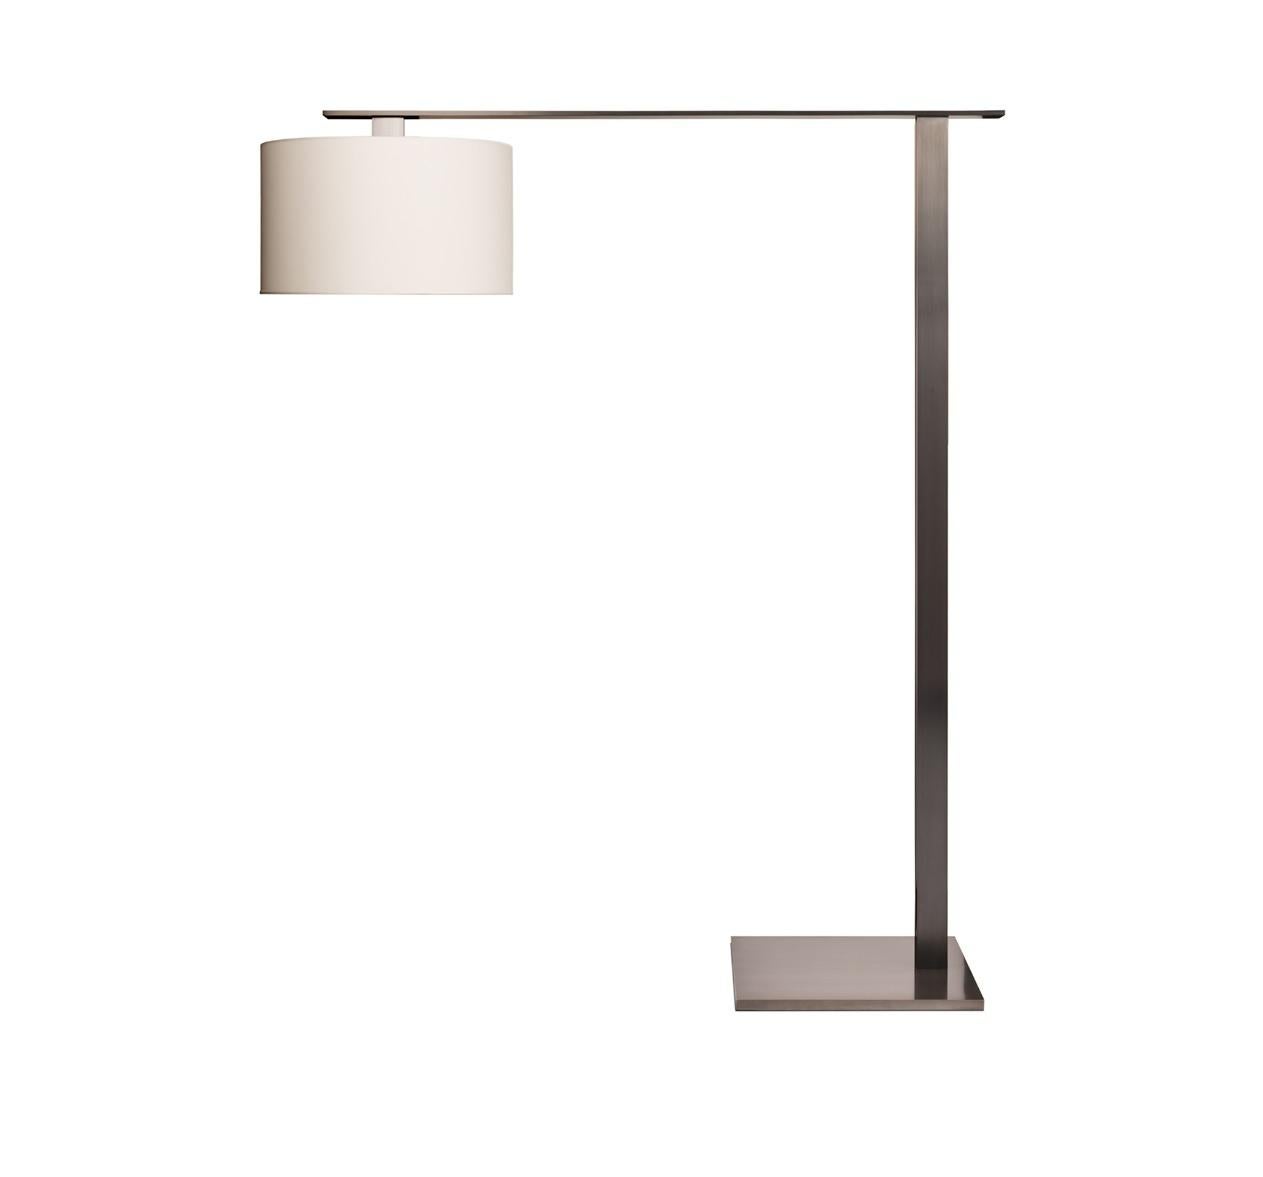 Atol floor lamp by LK Edition
Dimensions: 143 x 30 x H 170 cm 
Materials: Patinated Brass. 
Also available with paper shade.
All our lamps can be wired according to each country. If sold to the USA it will be wired for the USA for